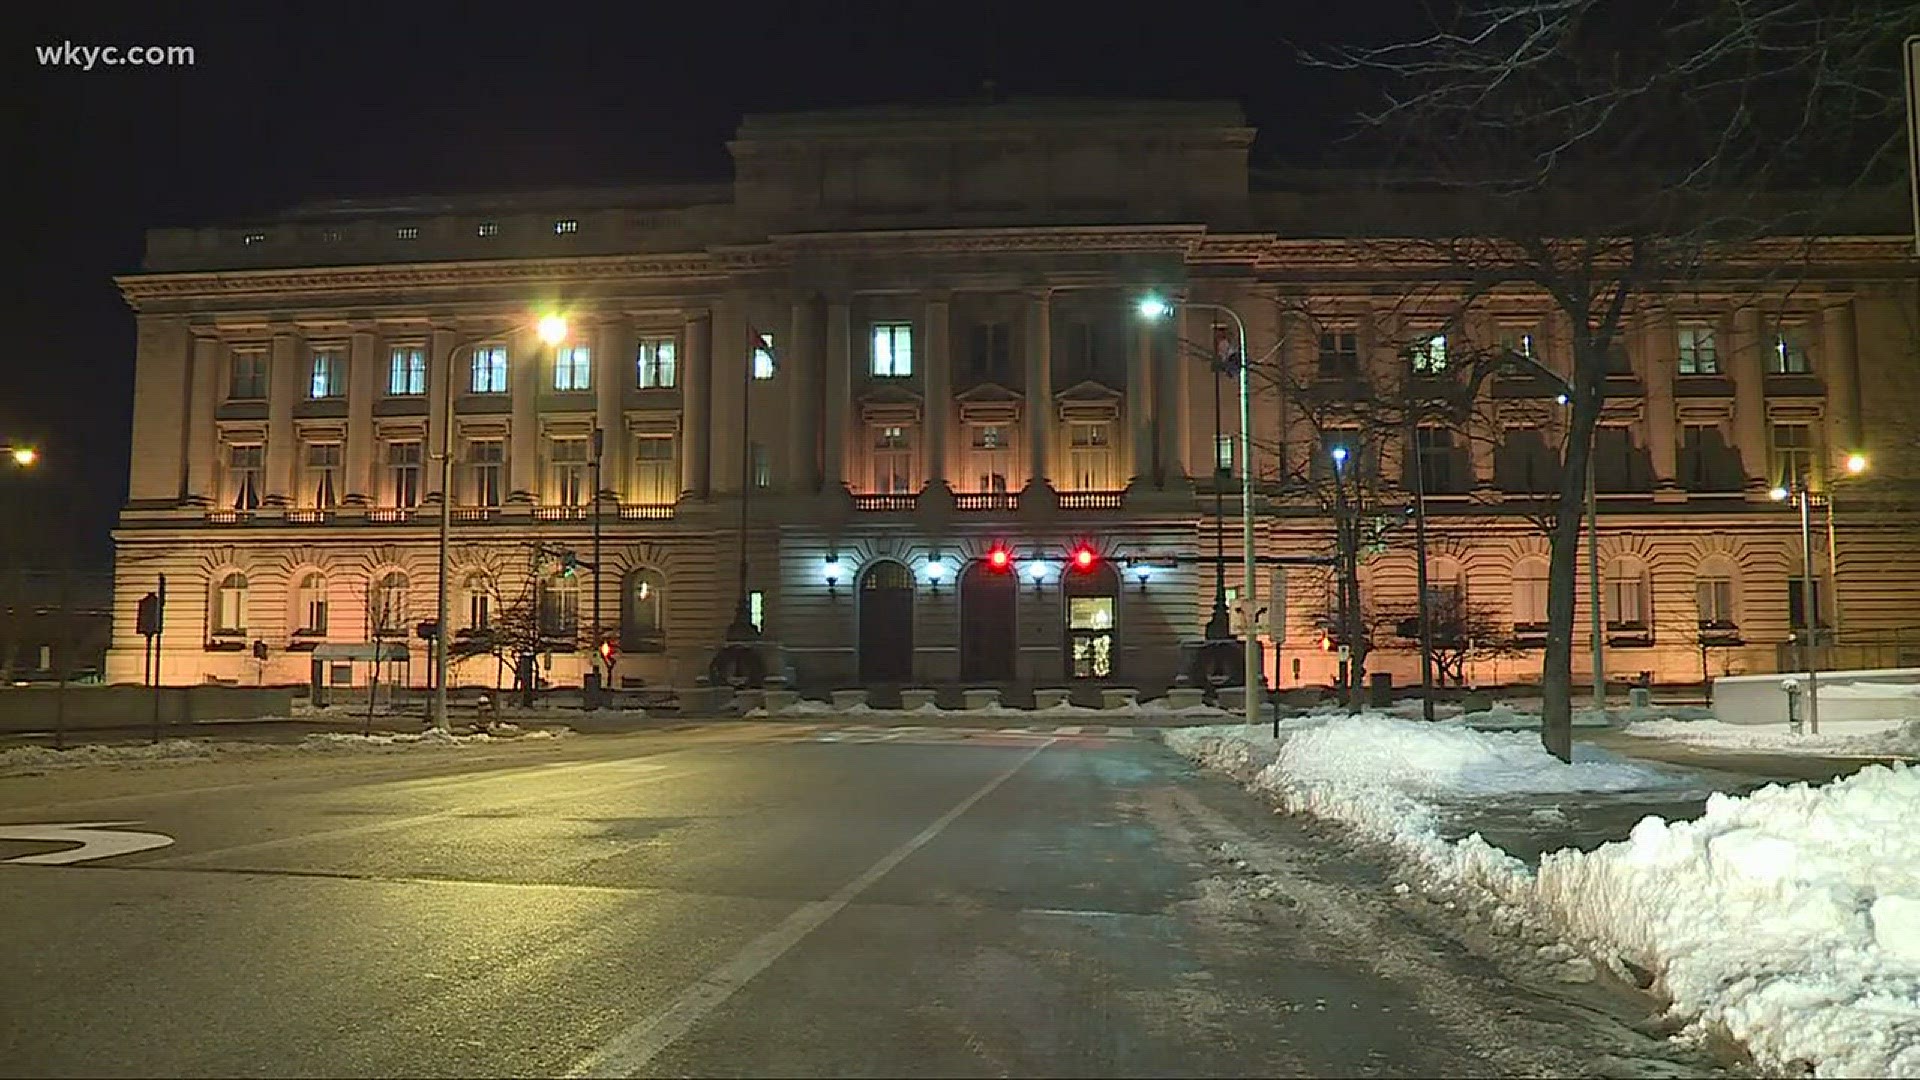 New videos, pictures, documents come to life in federal raid of Cleveland City Hall